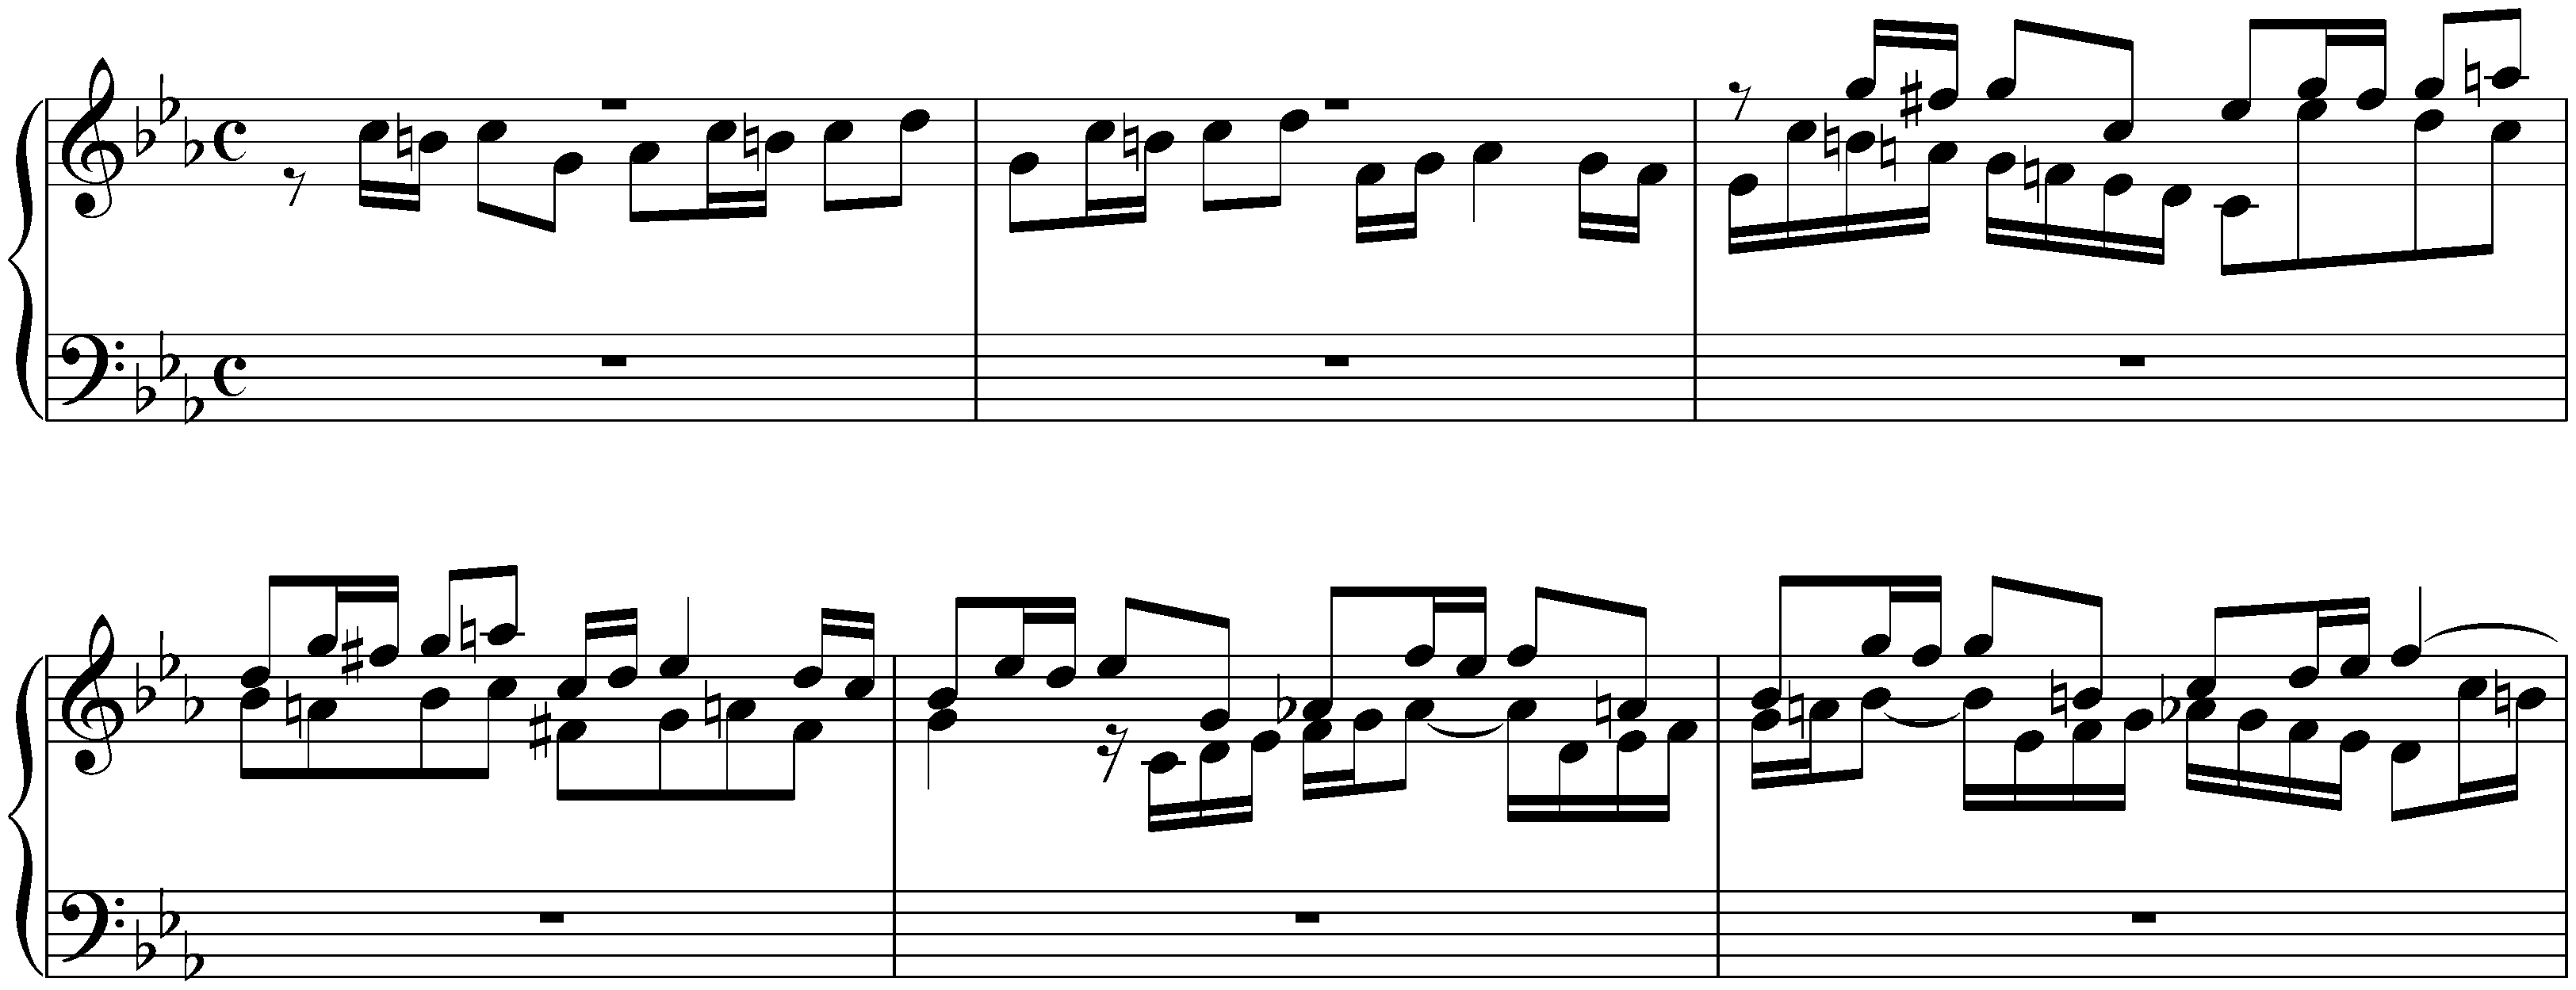 The Well-Tempered Clavier, Book 1, BWV 846–869; 2. C minor, BWV 847, Fugue